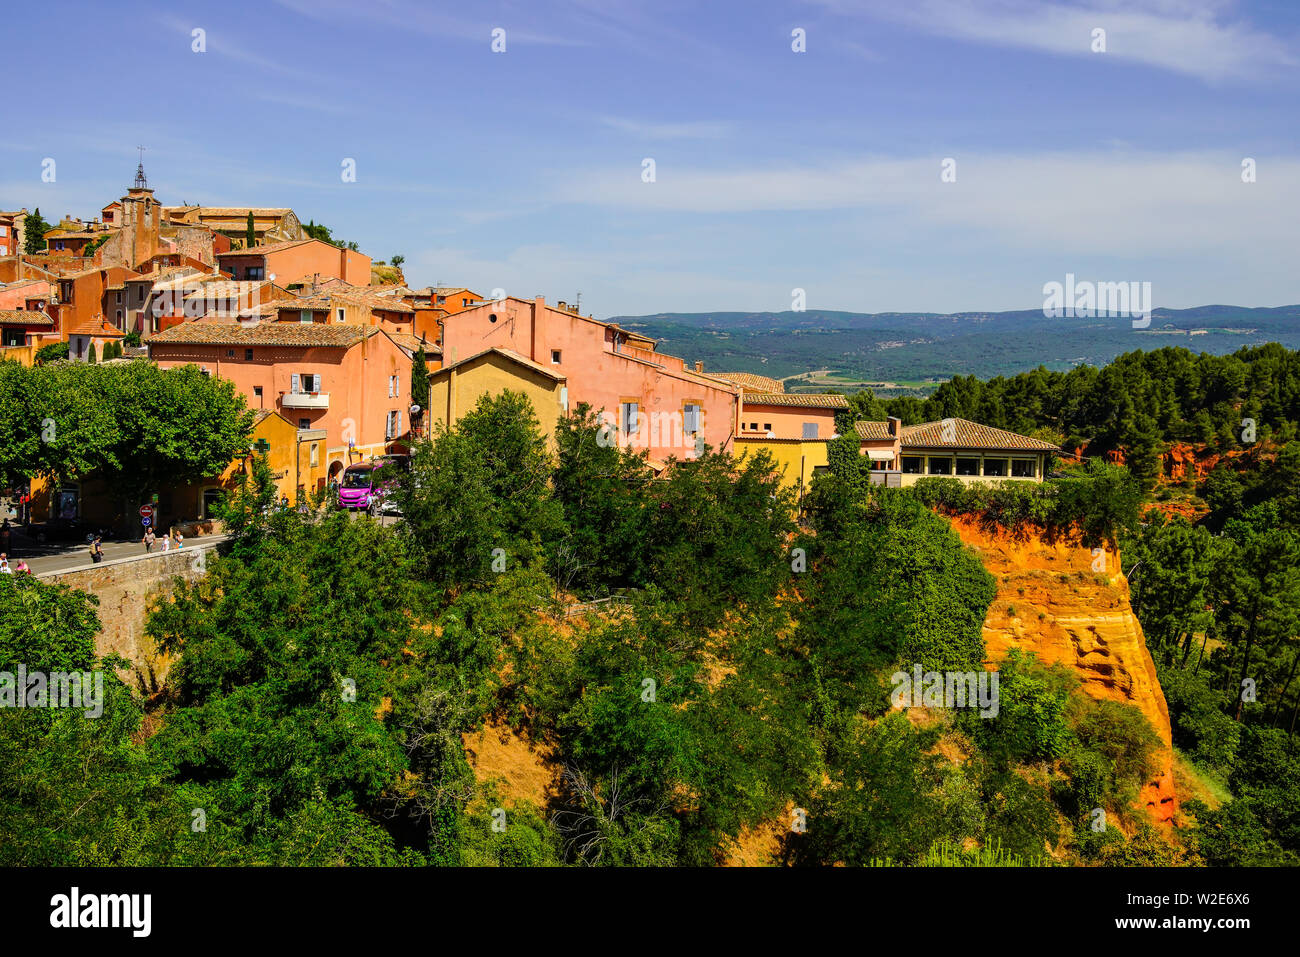 Picturesque village of Roussillon, Vaucluse, Provence, France. Stock Photo